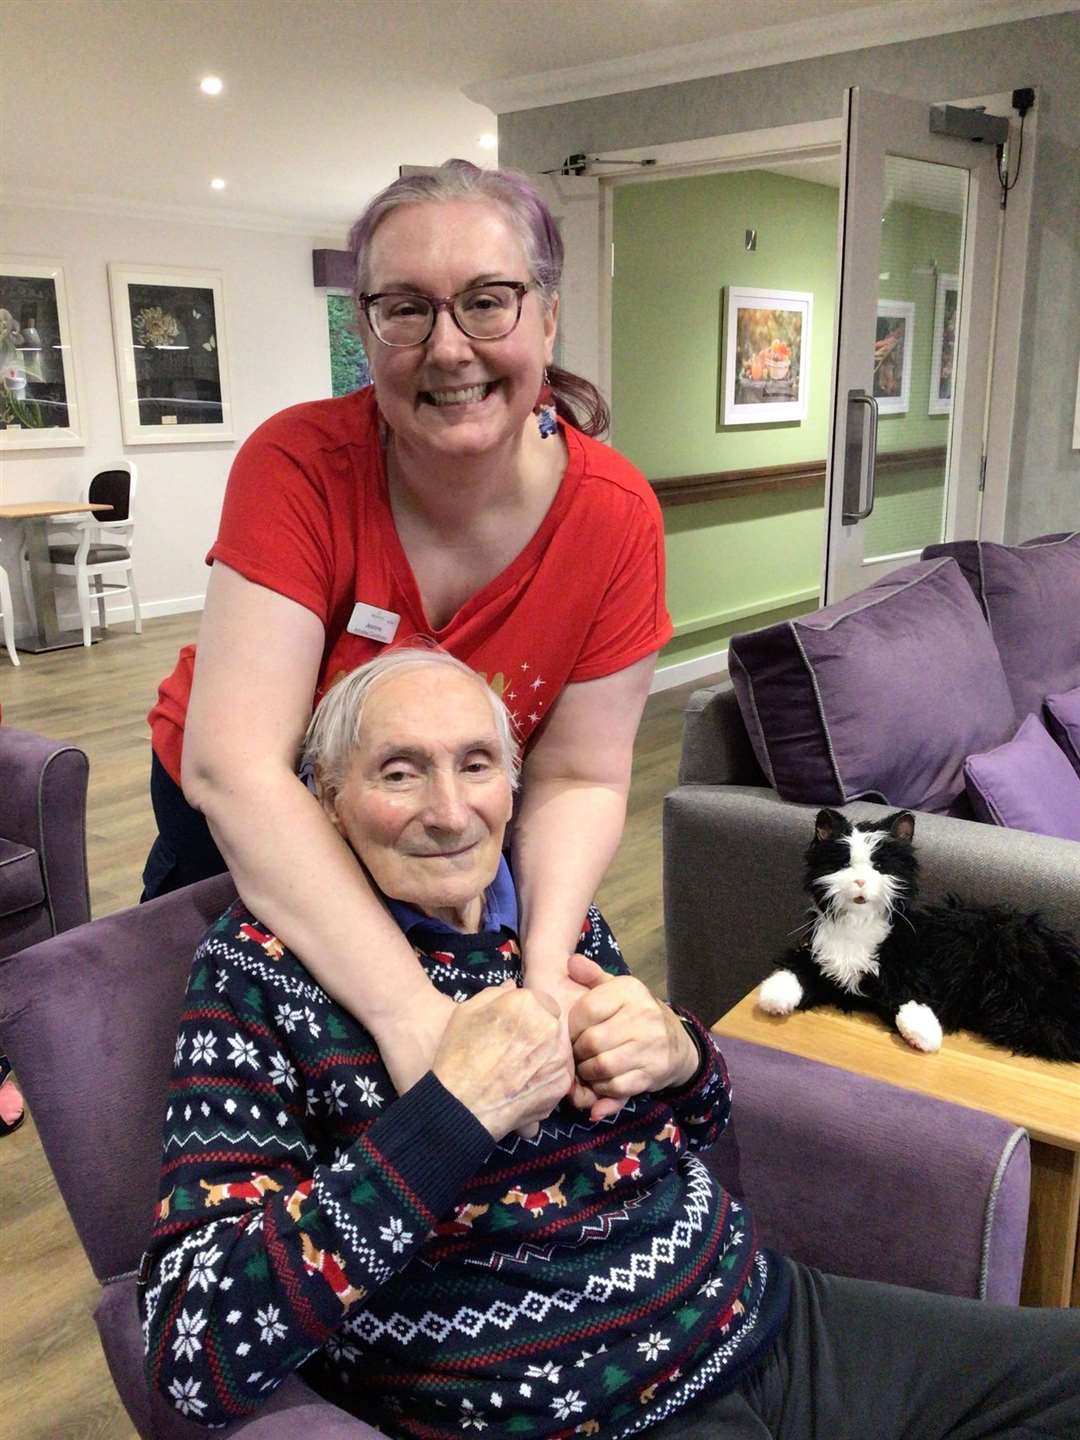 Don Calder, one of the residents of Pentland View who joined in on the festive fun for a good cause on Christmas Jumper Day, with staff member Jeanine Sinclair.